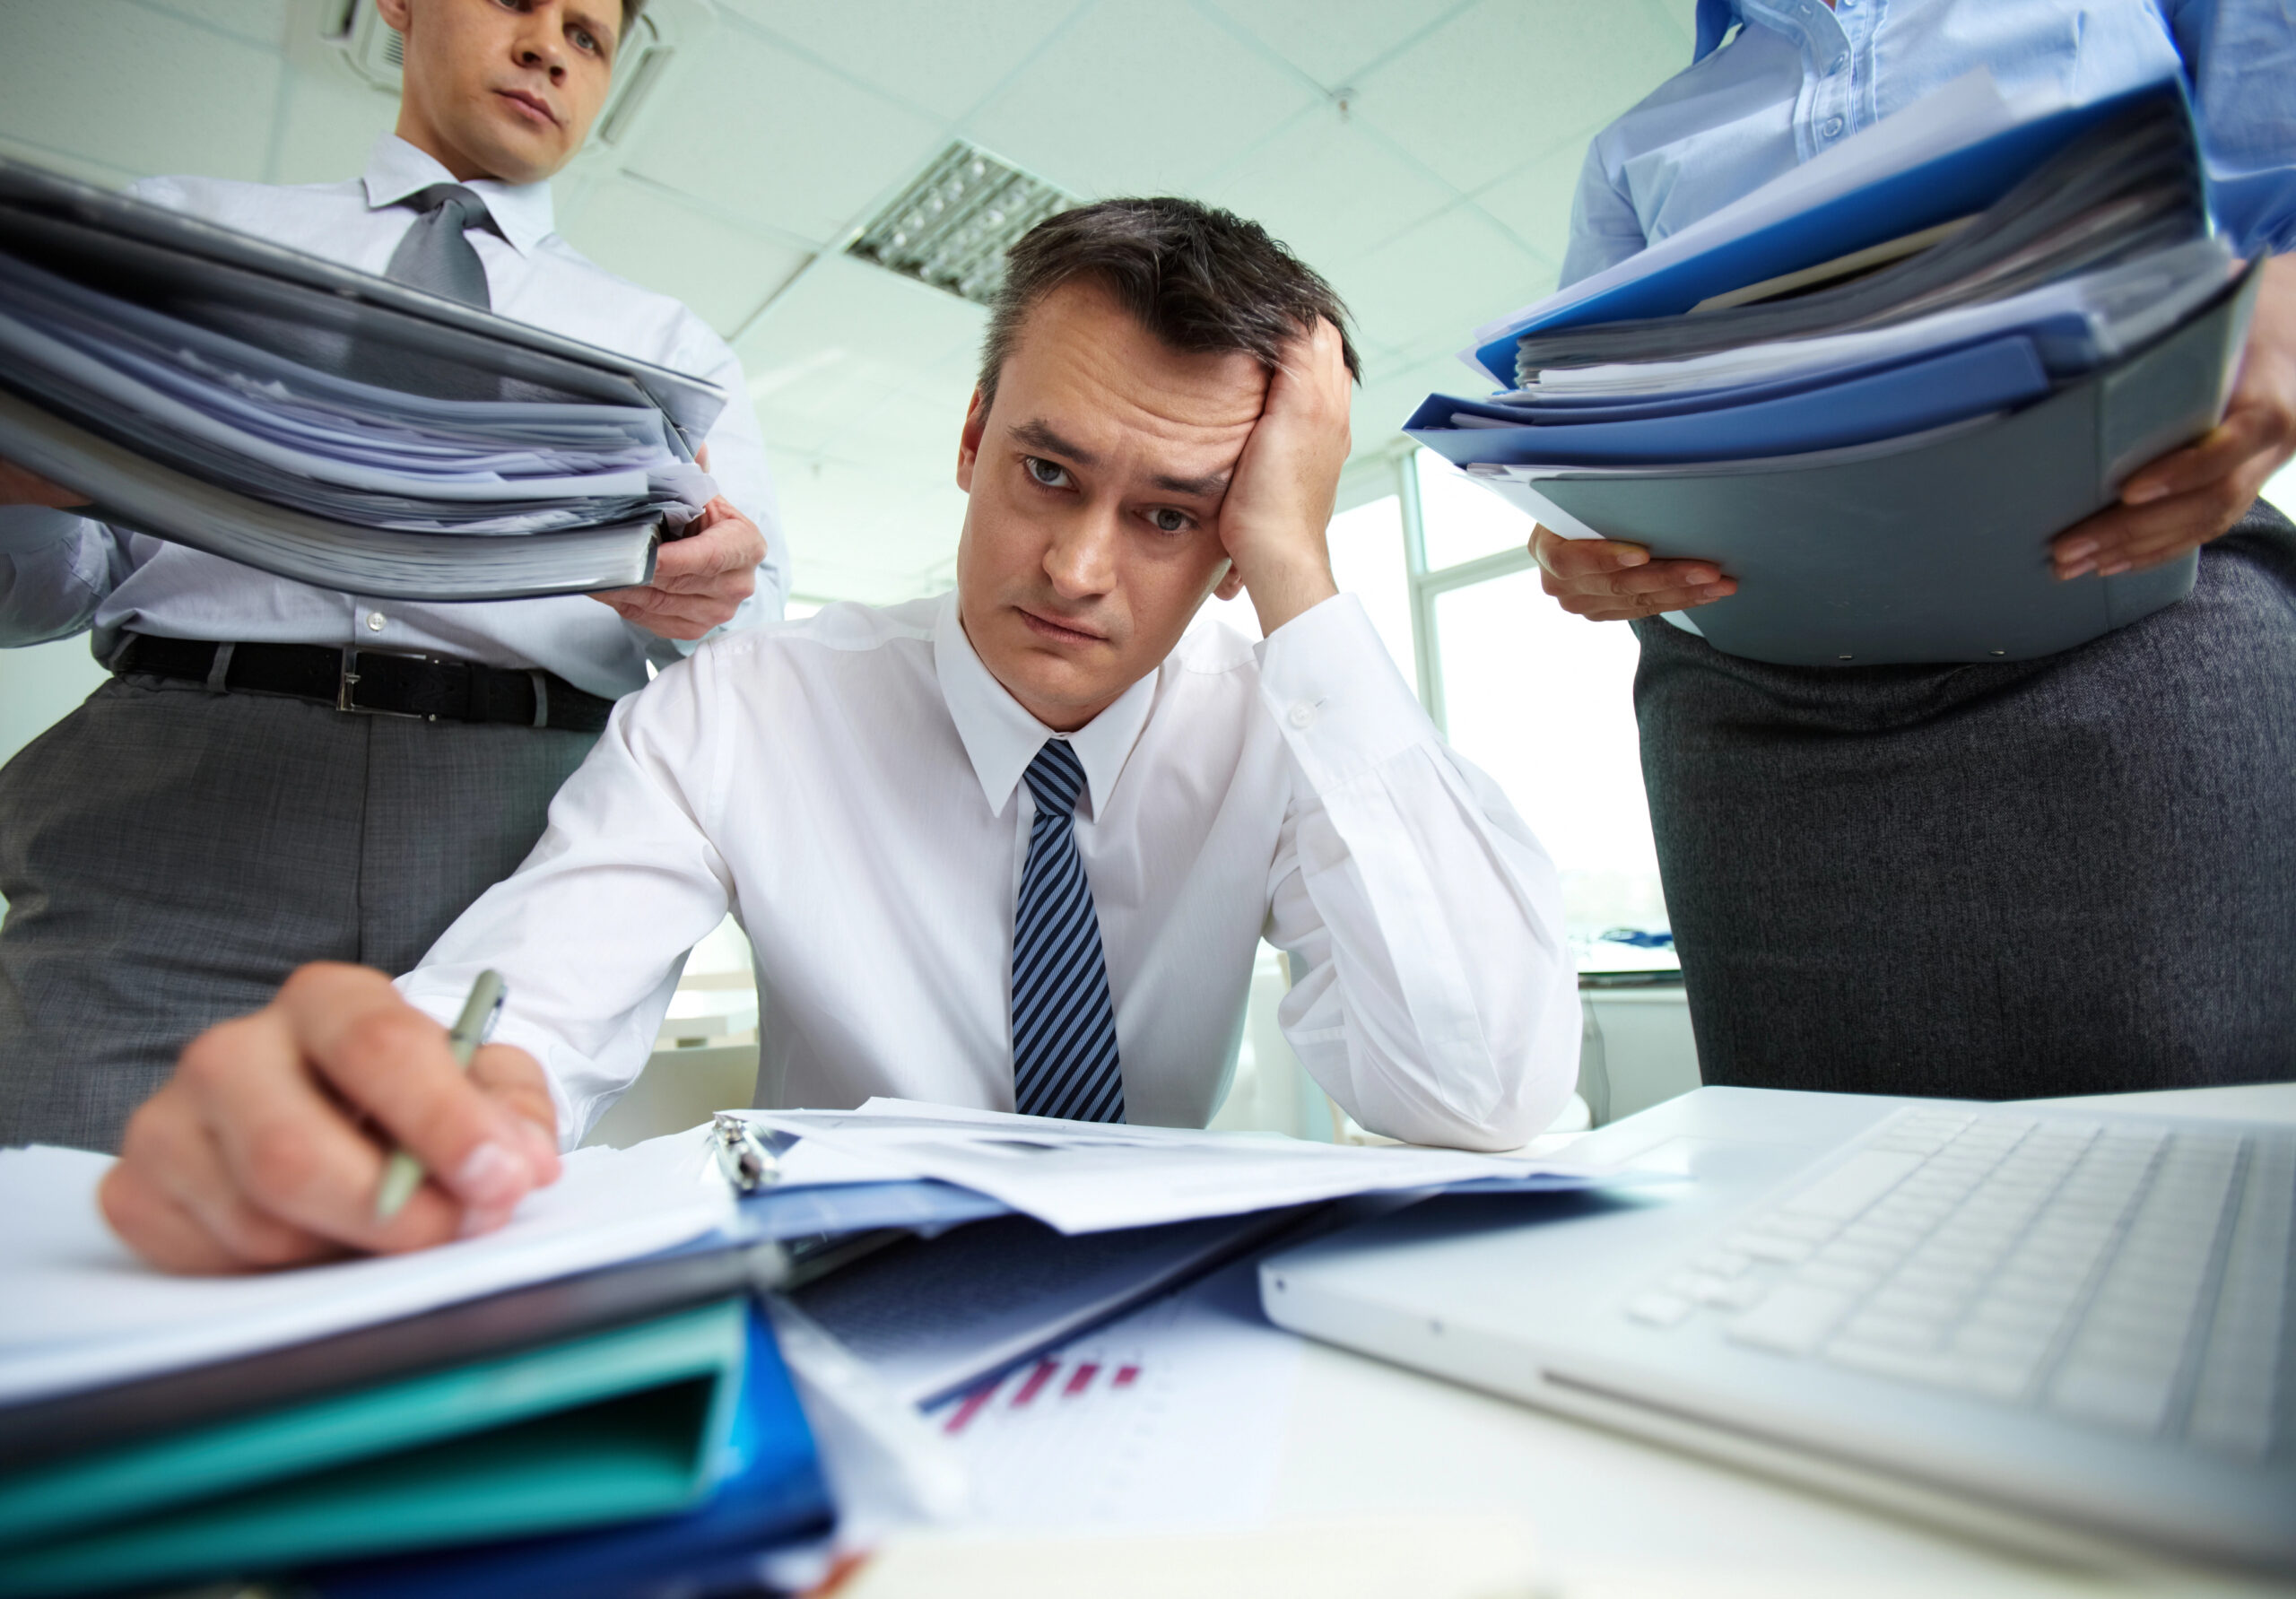 Businessman looking stressed leaning over a stack of papers with coworkers standing behind him